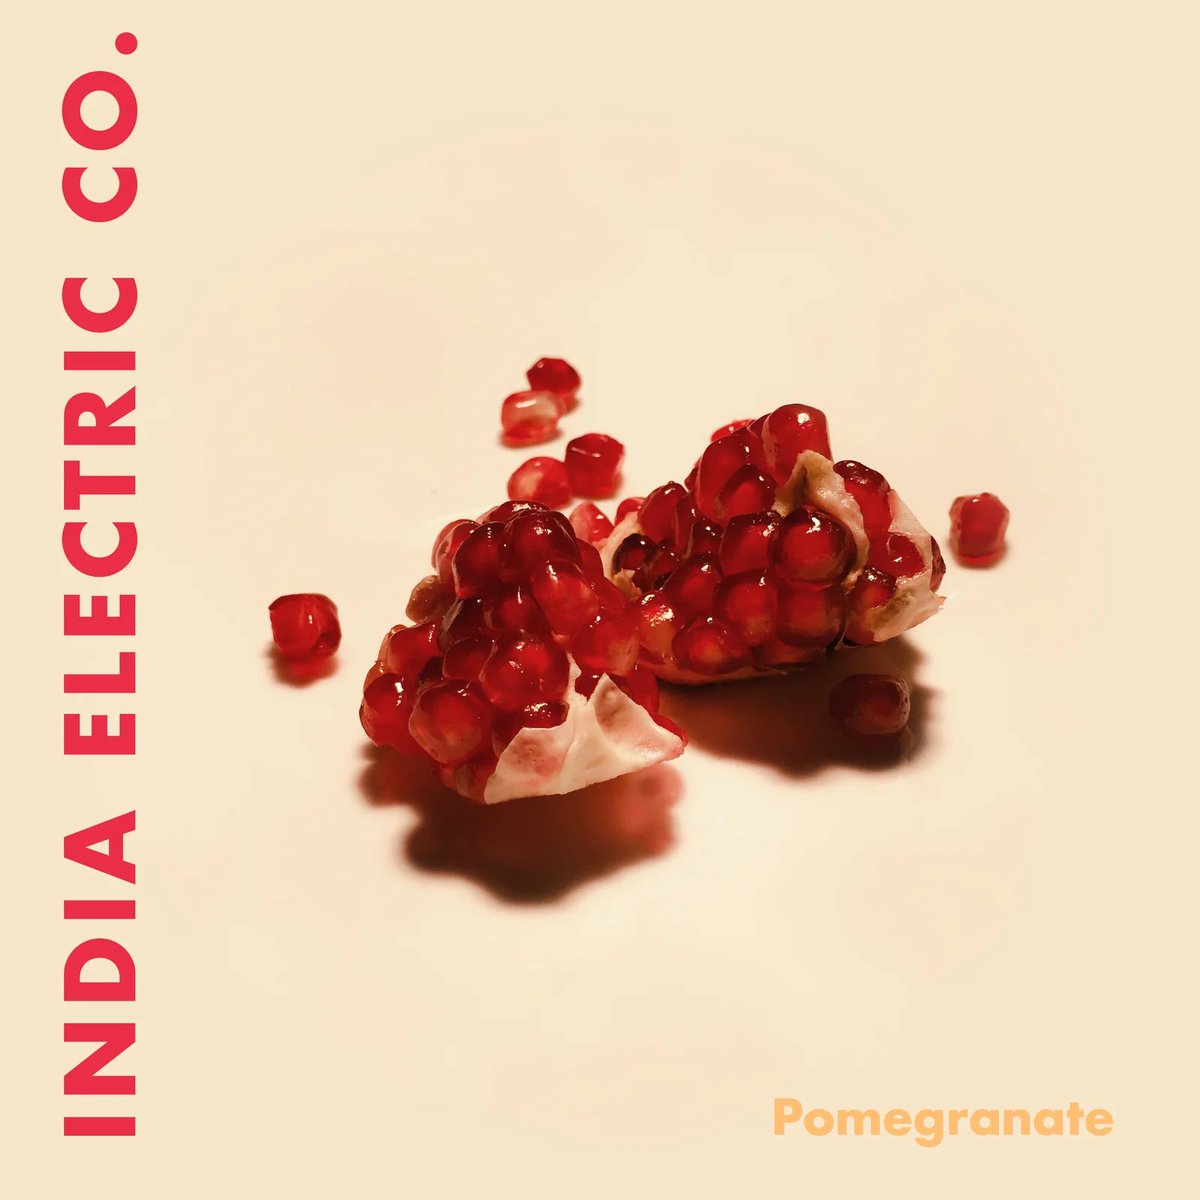 Hear tracks from my Album of The Week Pomegranate’ by @indiaelectricco today 12-2pm (1200-1400 BST) on The #EclecticLightShow on @marlowfm #communityradio #marlow